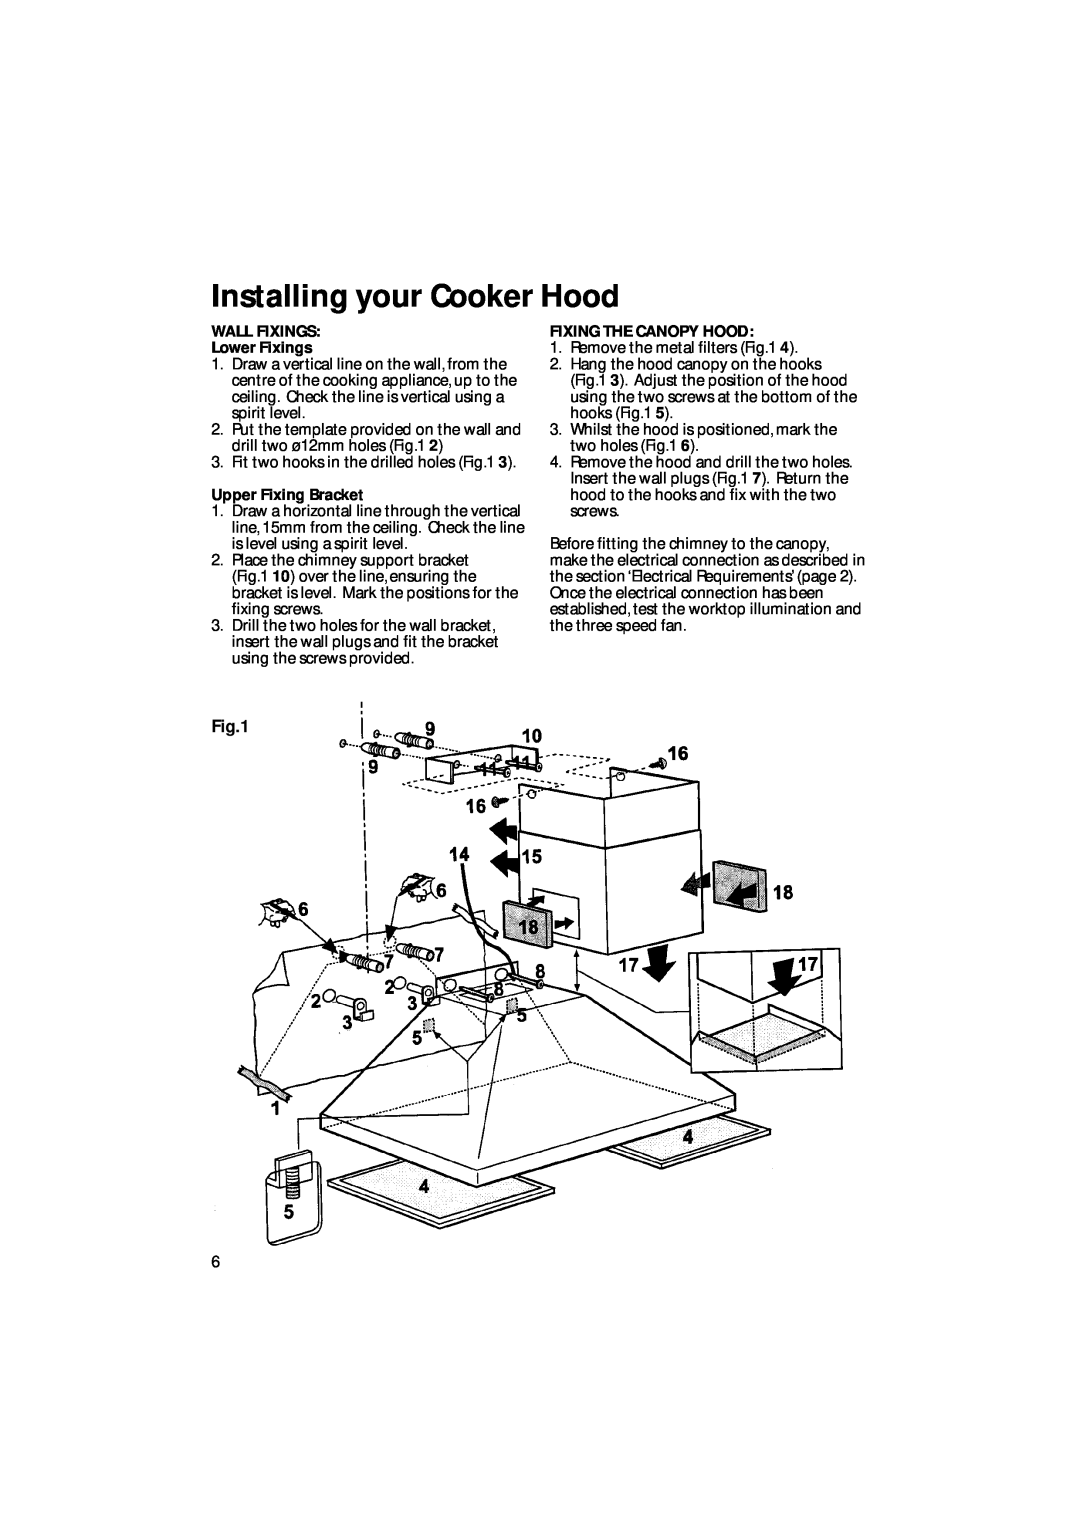 Creda CRC90, CRC65 Installing your Cooker Hood, WALL FIXINGS Lower Fixings, Upper Fixing Bracket, Fixing The Canopy Hood 